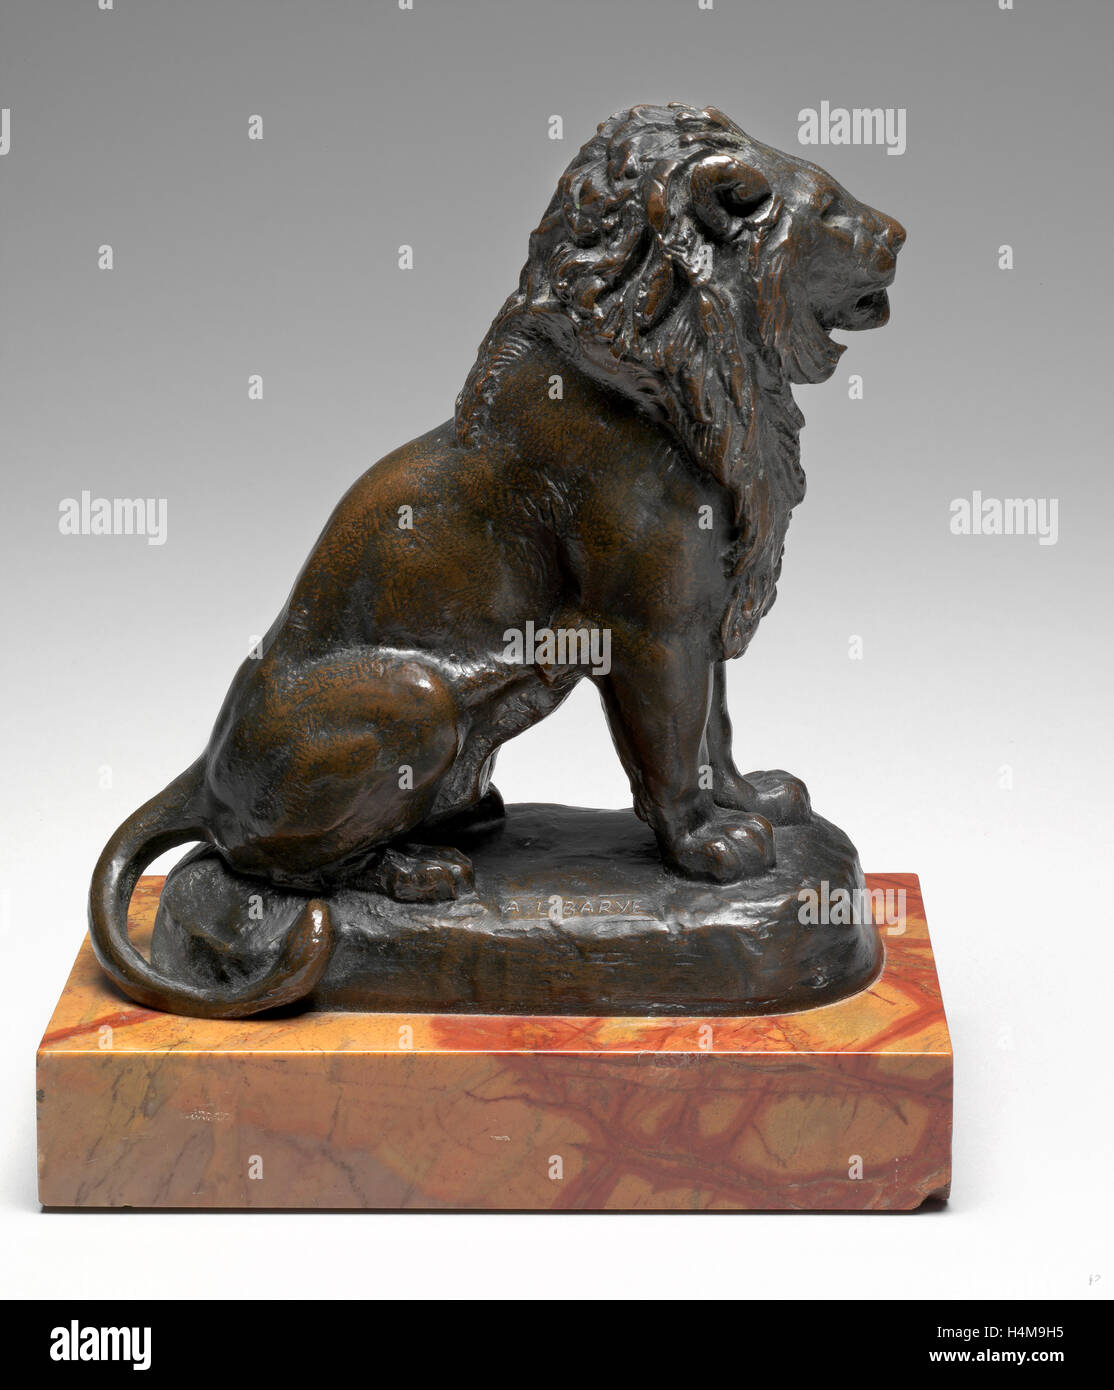 Antoine-Louis Barye, Seated Lion, French, 1795-1875, model c. 1846, cast after 1870, bronze Stock Photo